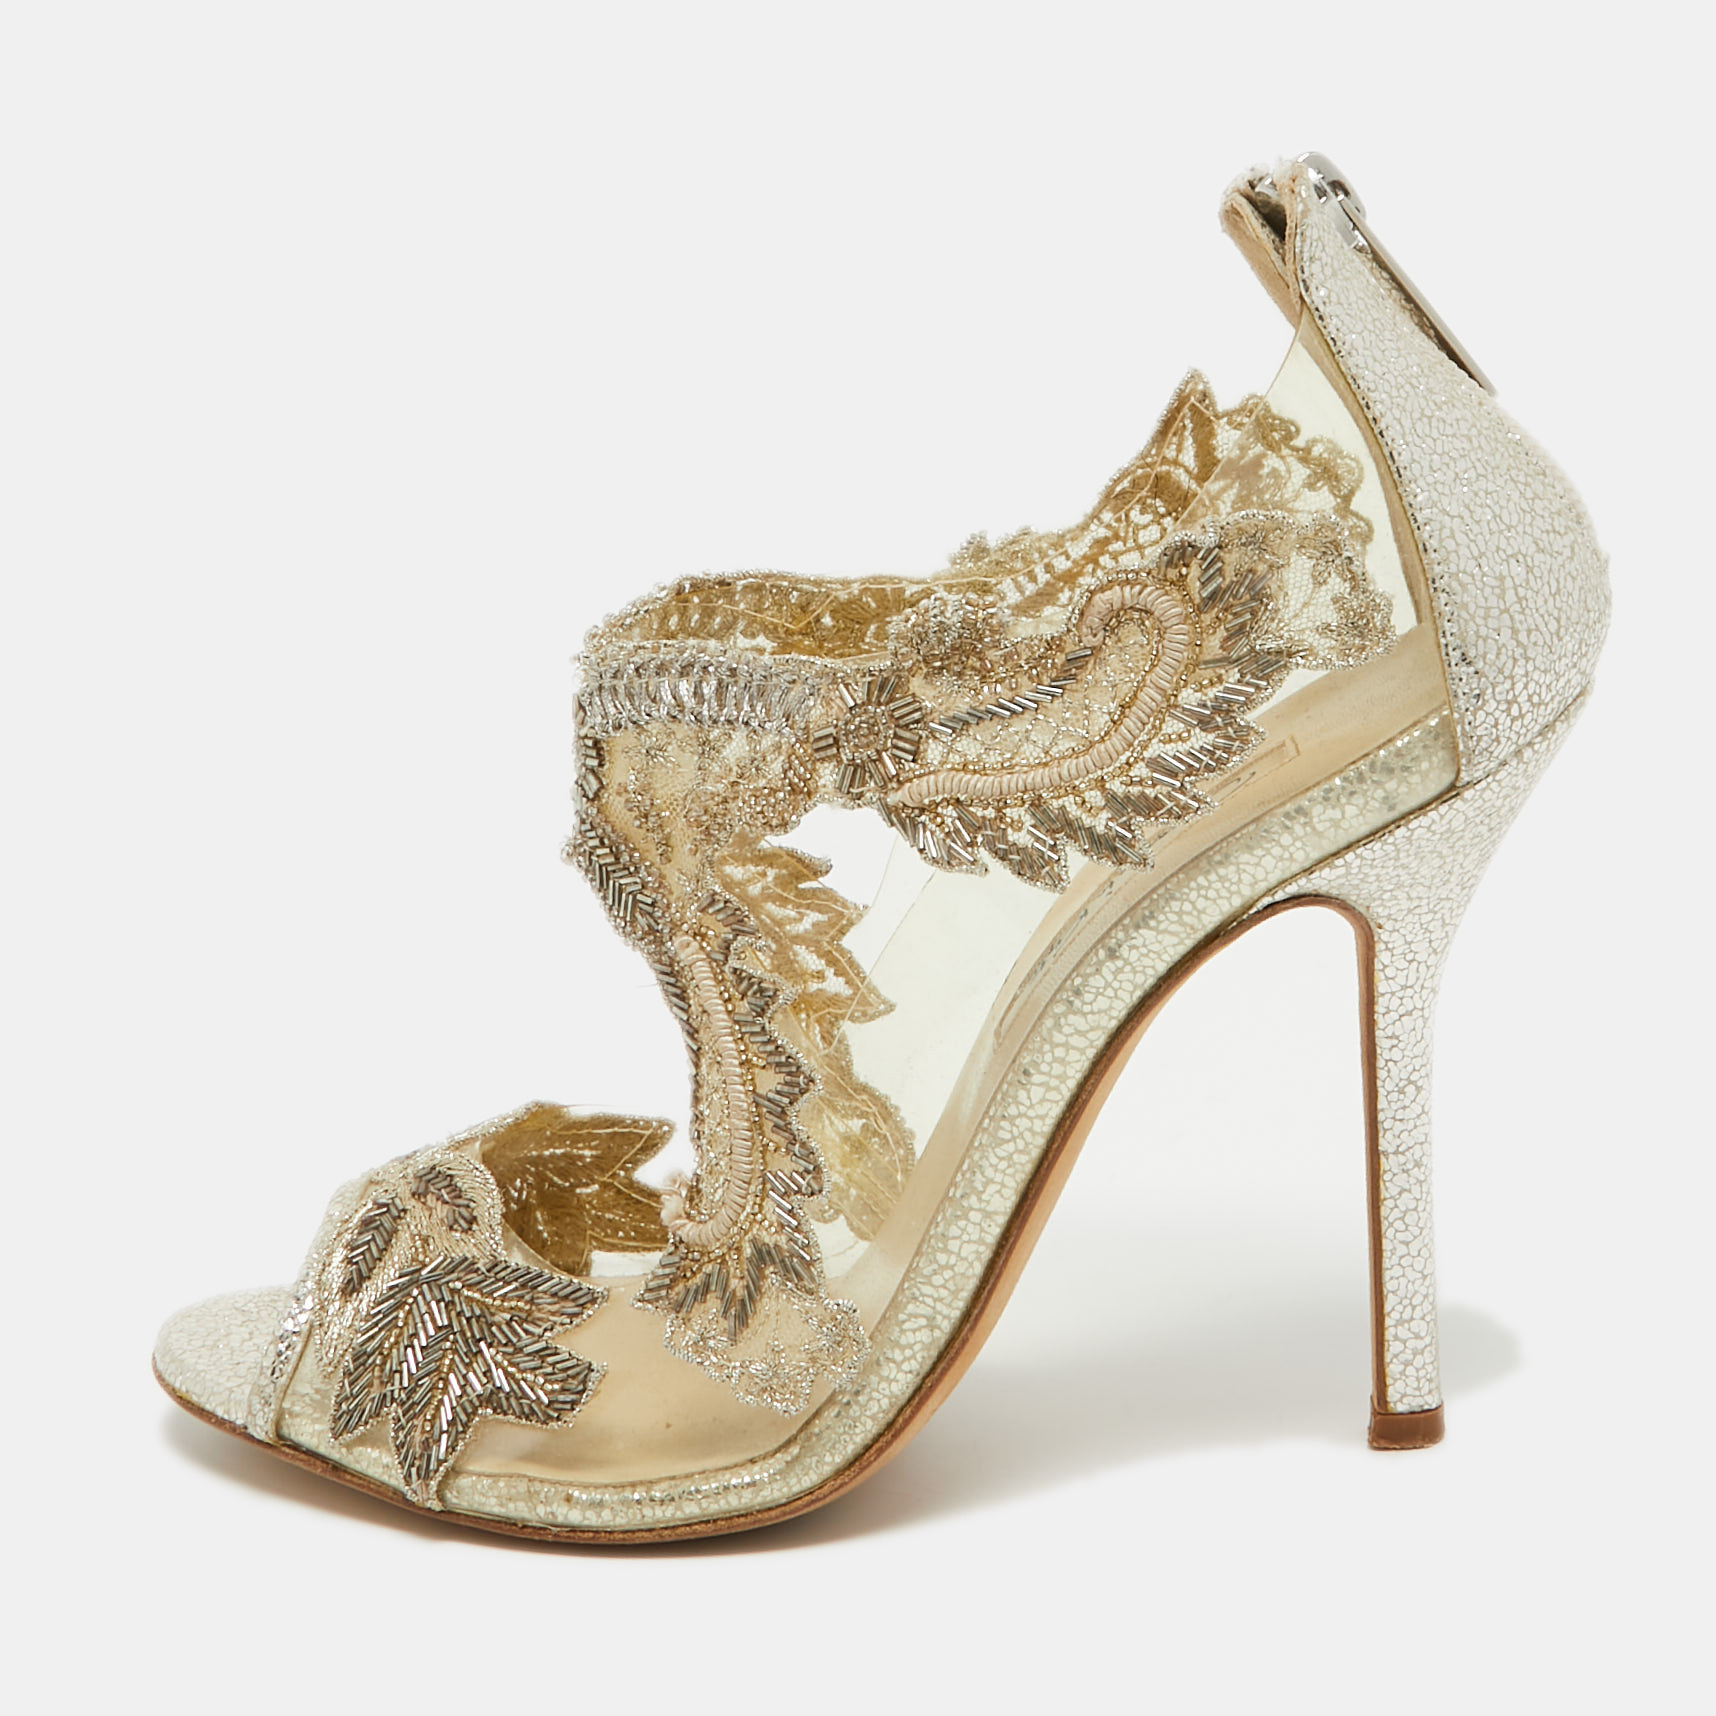 Pre-owned Oscar De La Renta Metallic Pvc And Texture Leather Ambria Sandals Size 37.5 In Gold